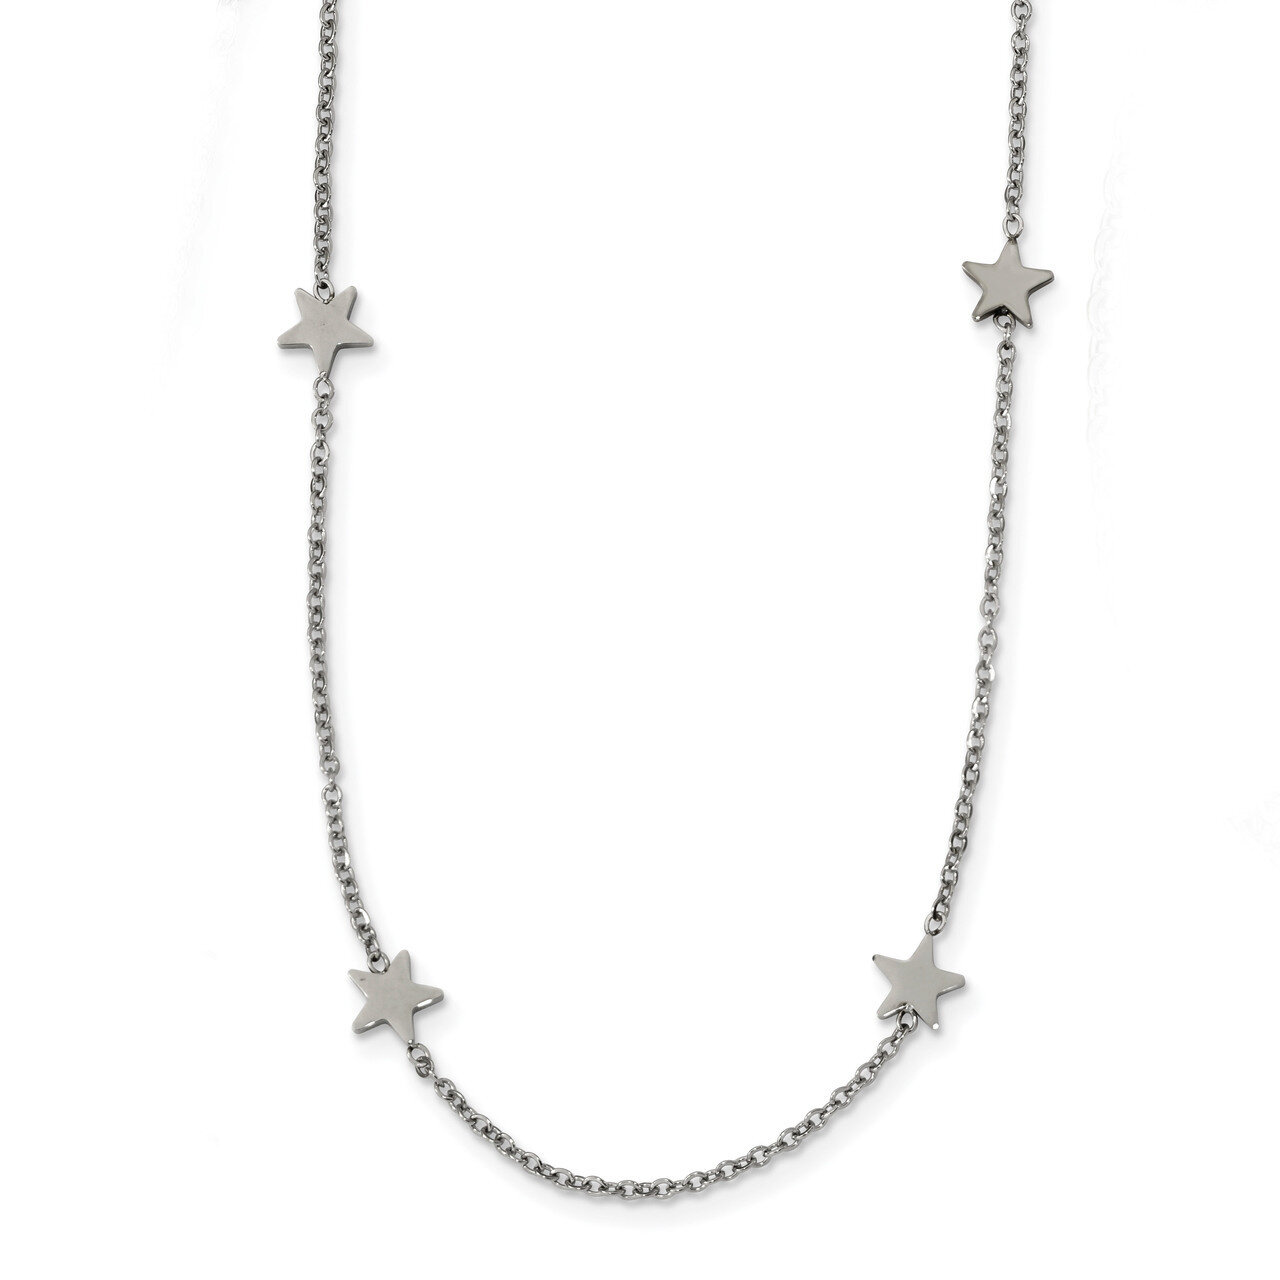 Stars 35 inch Necklace Stainless Steel Polished SRN2489-35